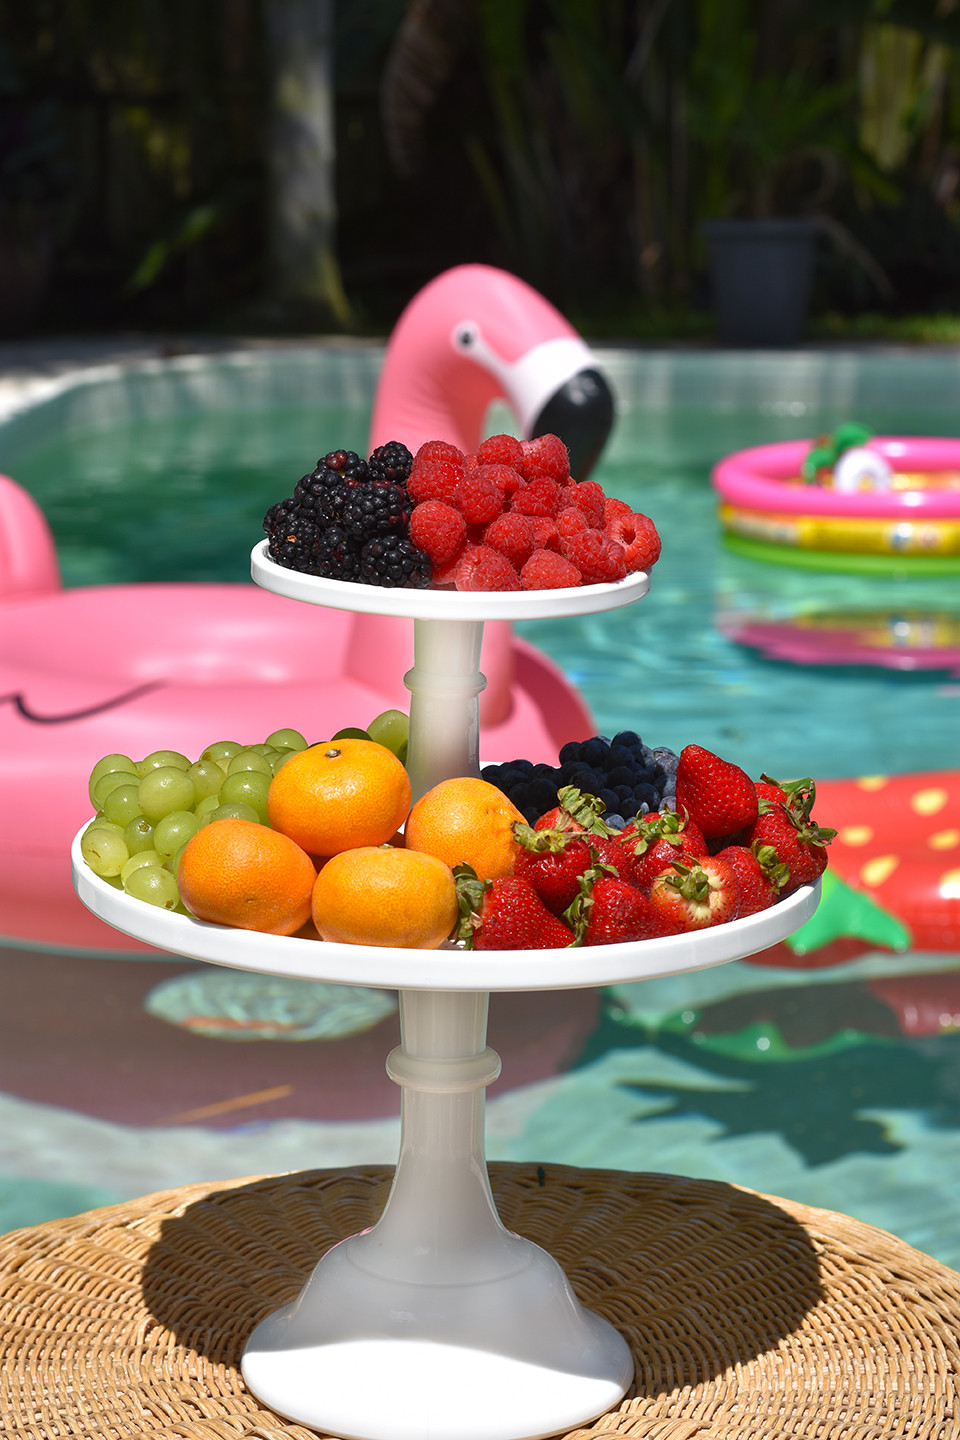 Adult Pool Party Ideas
 Pool Party Ideas for Adults • Happy Family Blog